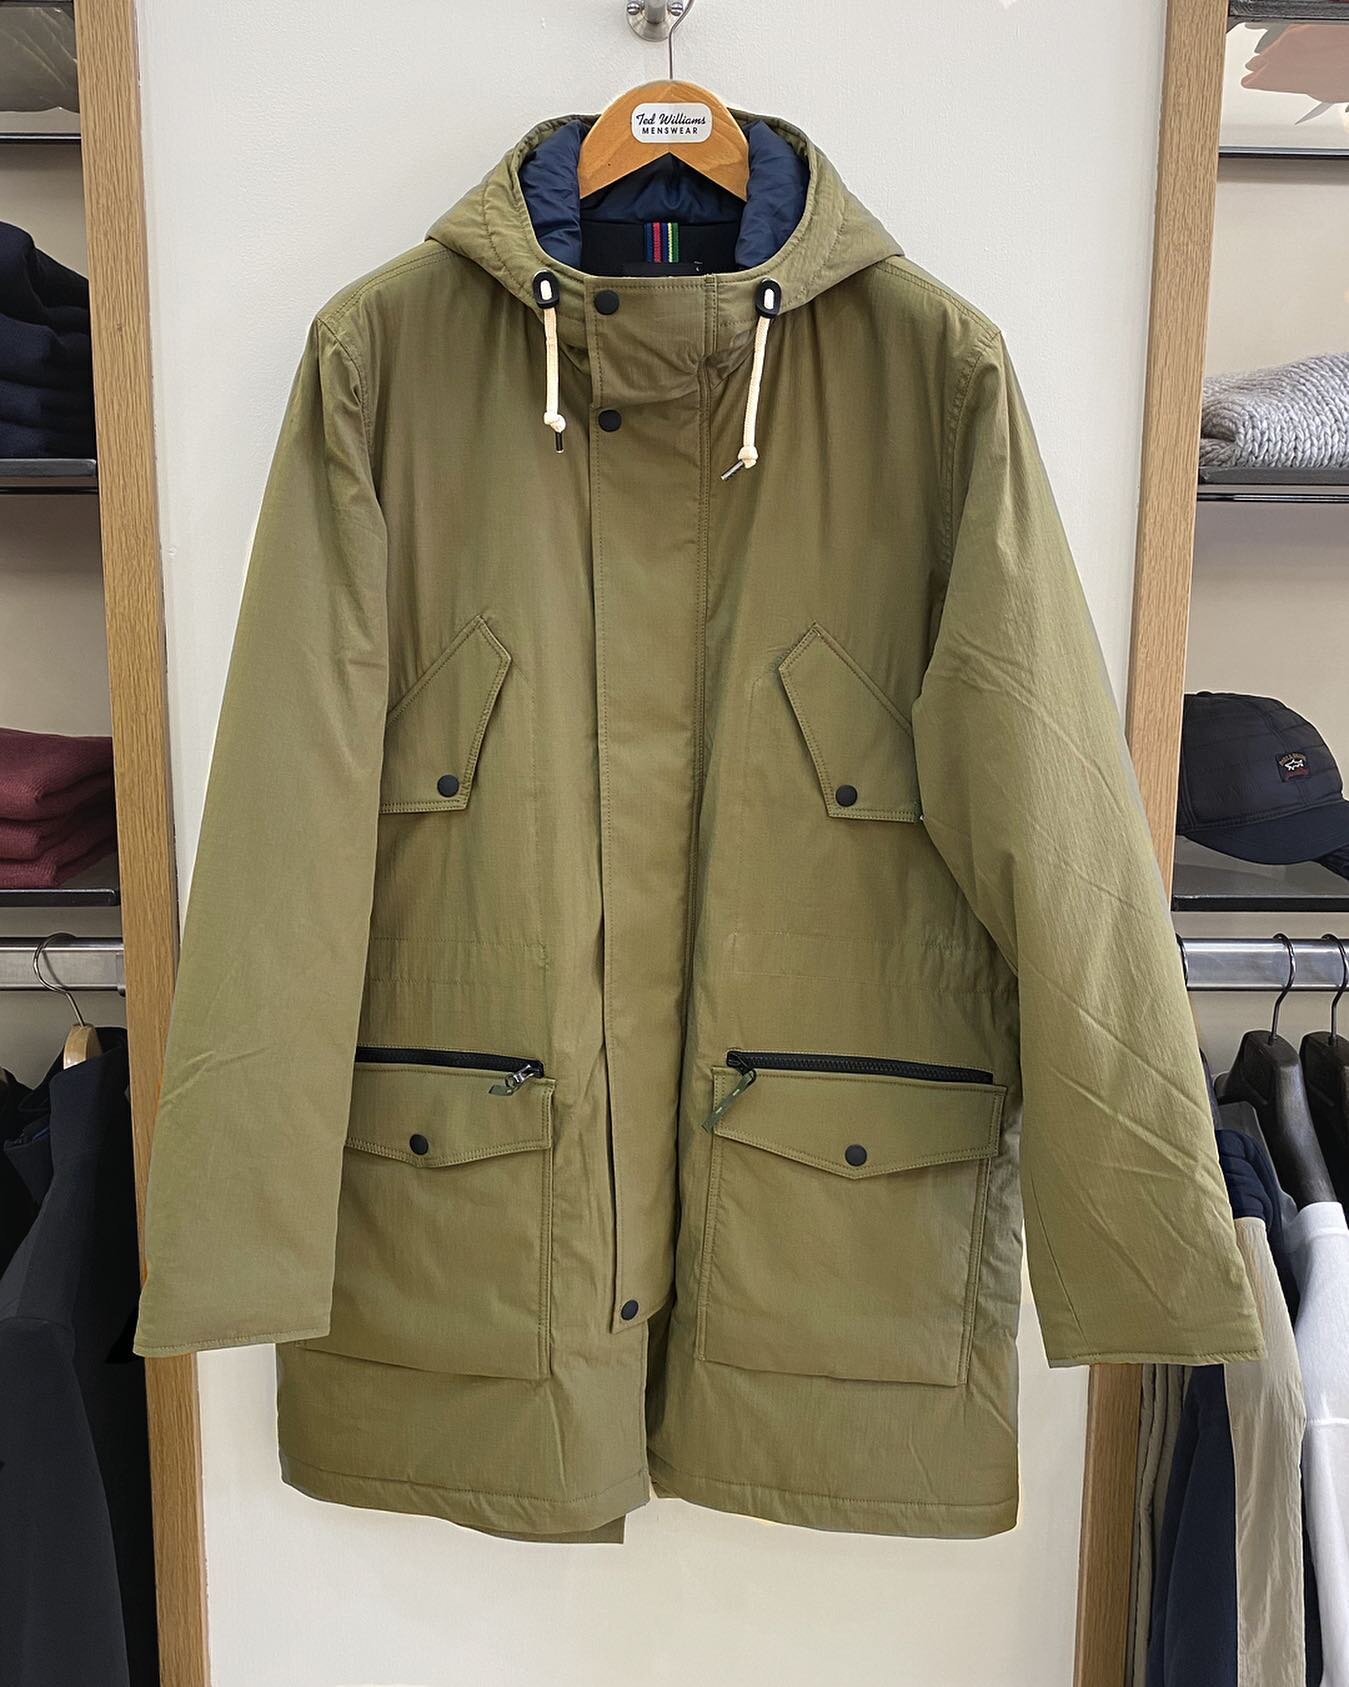 Khaki fishtail parka from PS by Paul Smith. Crafted from a cotton-blend ripstop cloth and features military-inspired design details. Showerproof finish.

Available in store. 

#tedwilliamsmenswear #psbypaulsmith #parka #mensfashion #mensdesignercloth